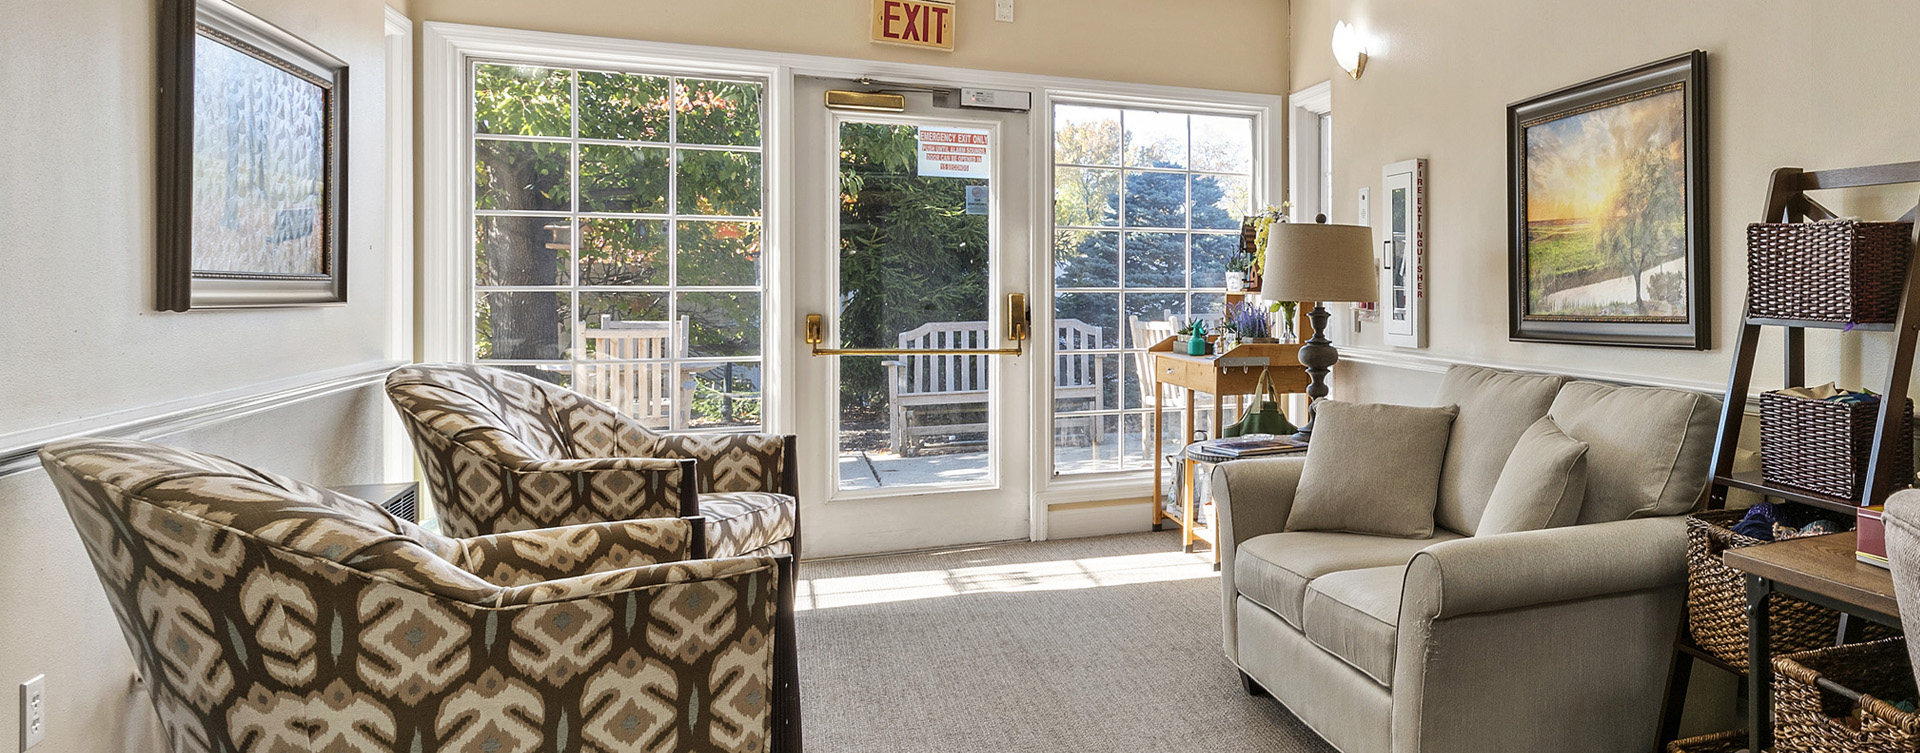 Enjoy the view of the outdoors from the sunroom at Bickford of Worthington